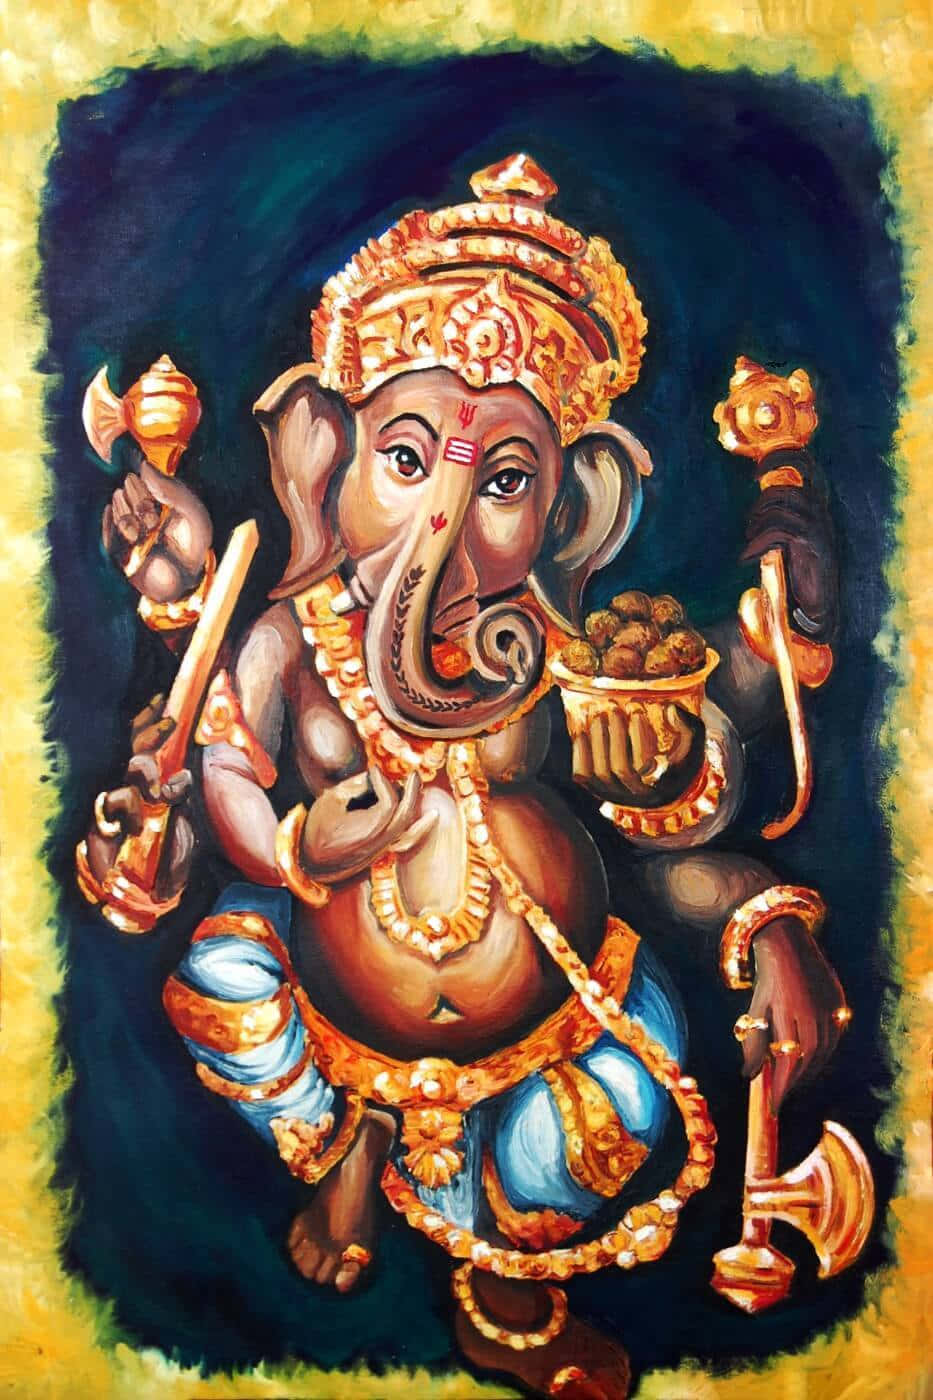 God Ganesha - The Remover of Obstacles